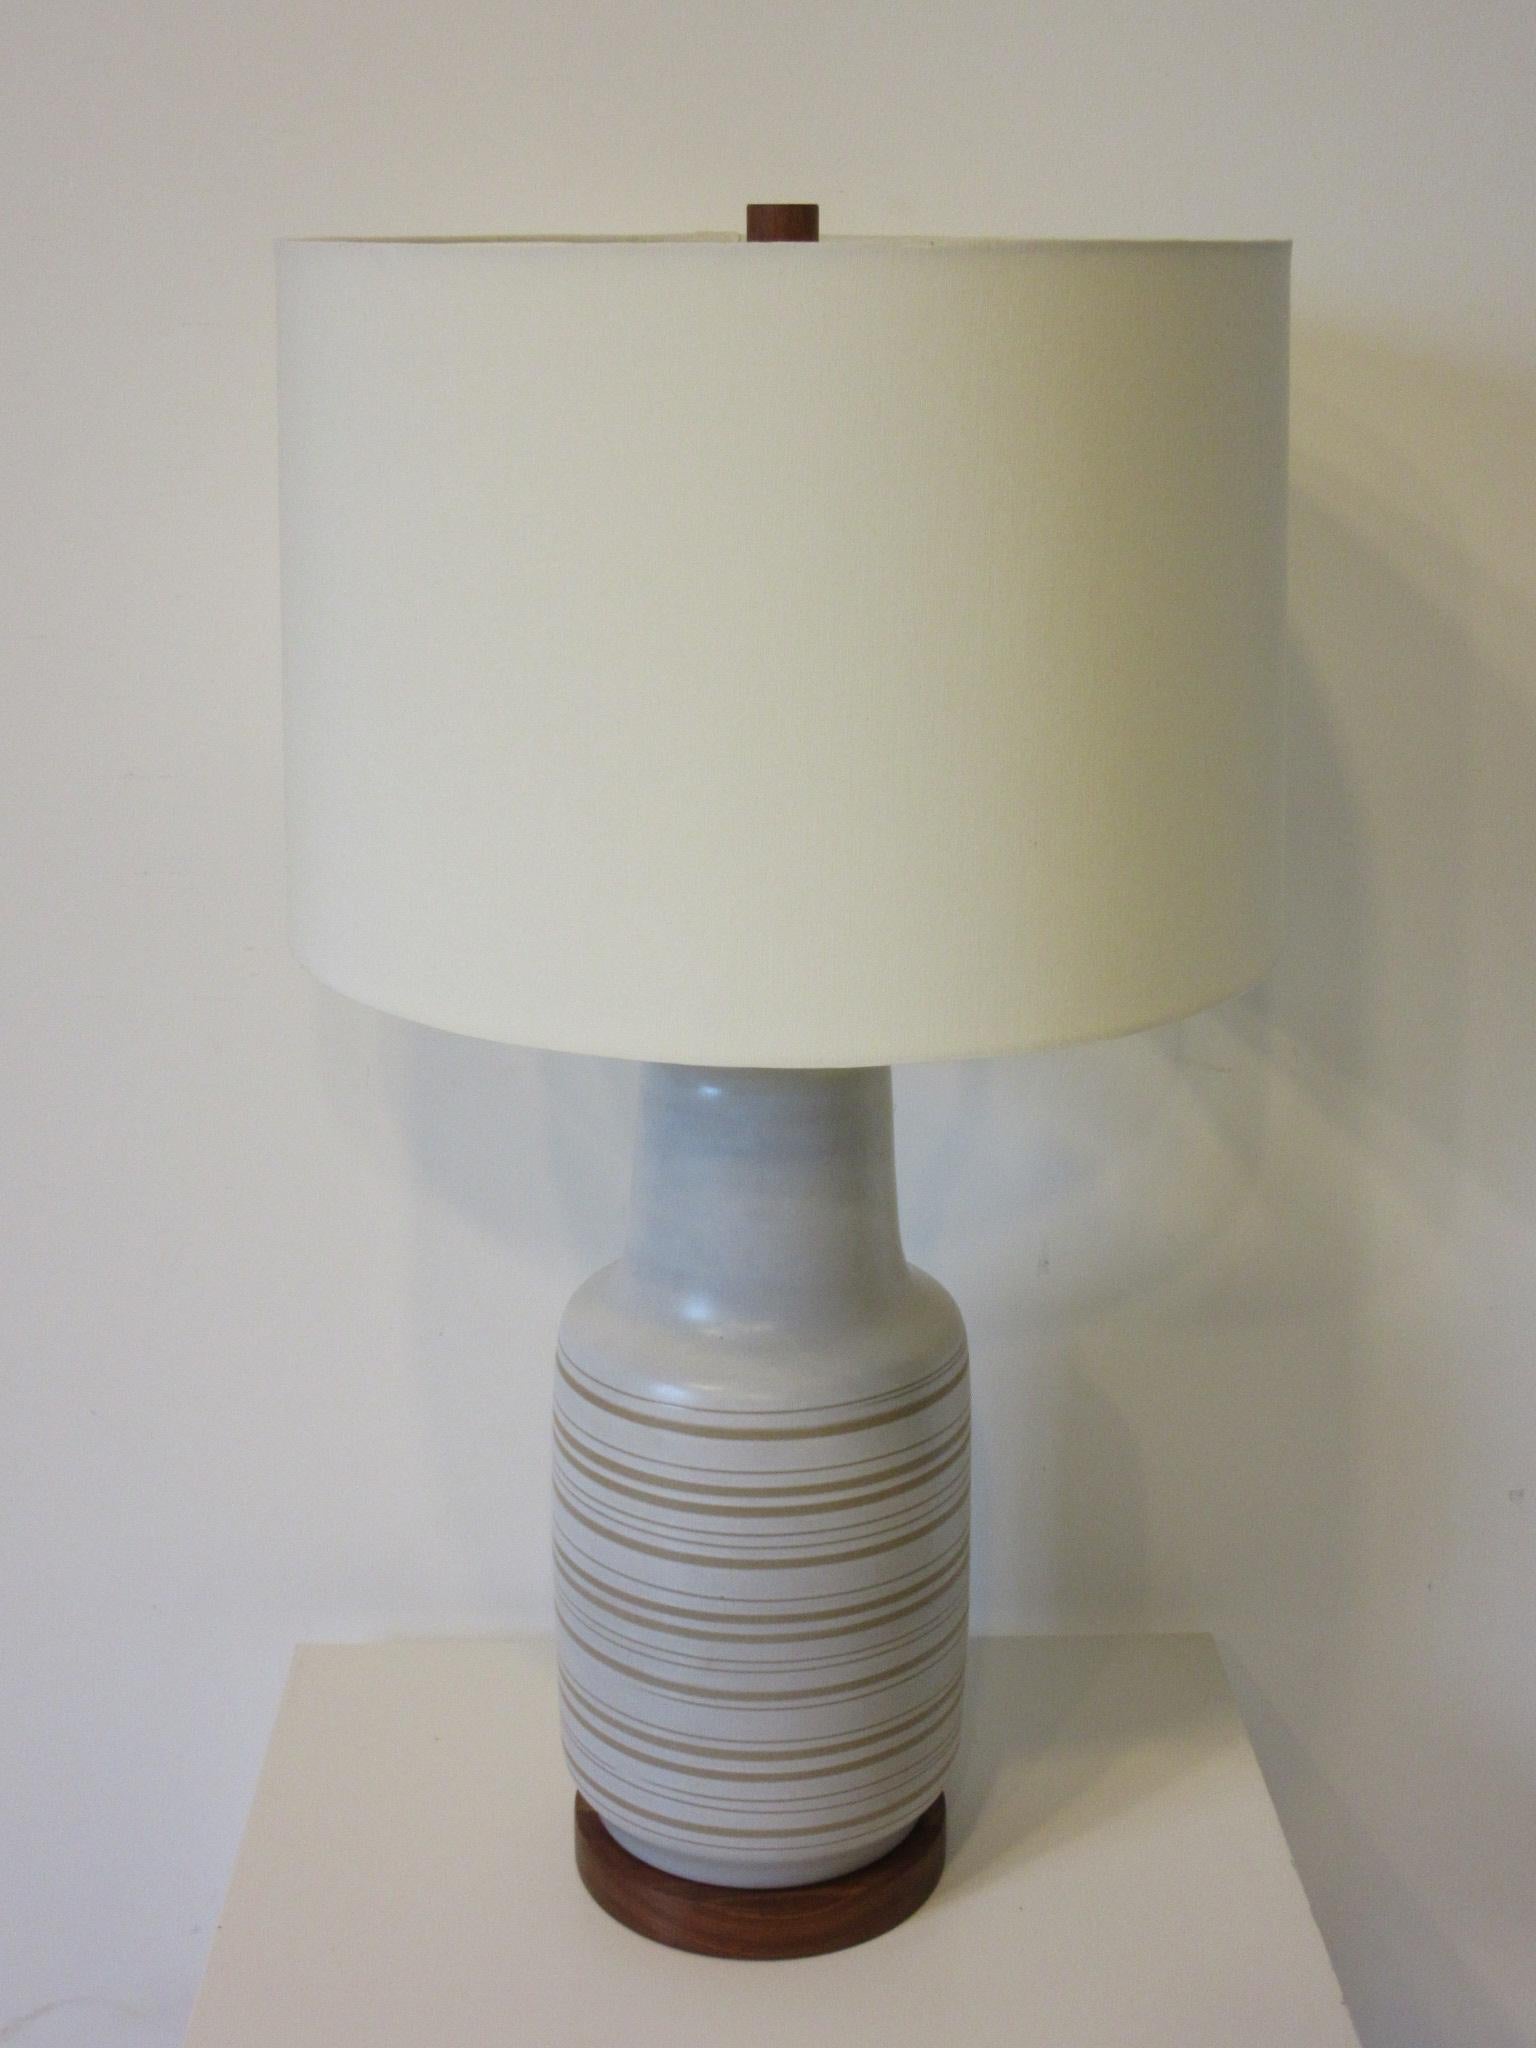 A midcentury pottery table lamp in cream having incised sand tone color stripes with original teak wood base and matching finial. The original shade has been replaced with a high end up to date light cream colored linen shade, the lamp retains the